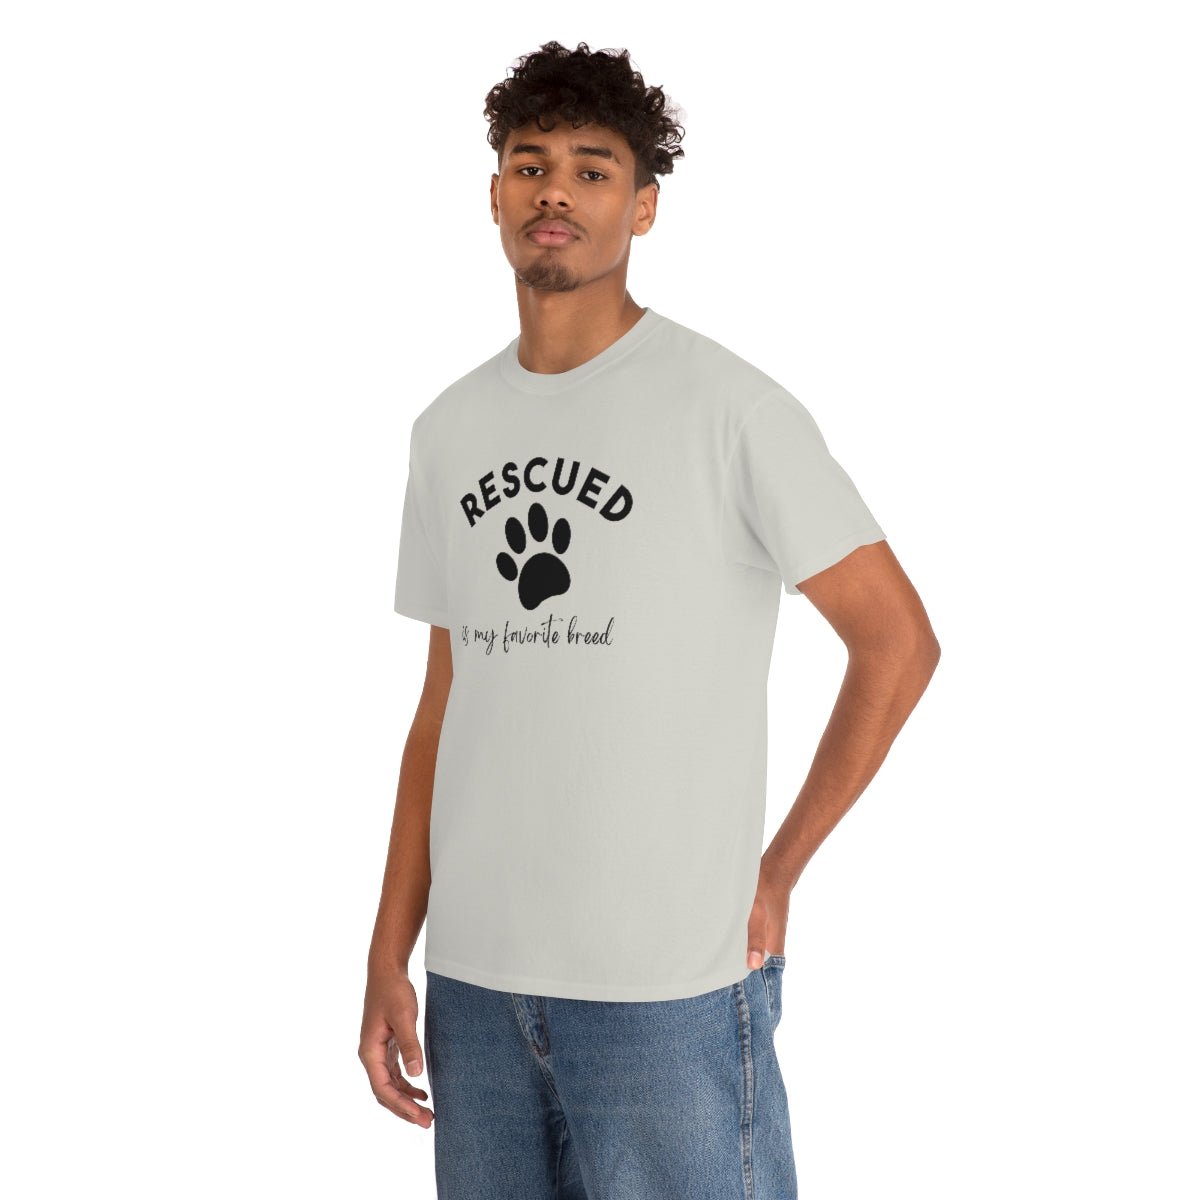 Rescued Is My Favorite Breed Paw | Text Tees - Detezi Designs-25595772363112954410